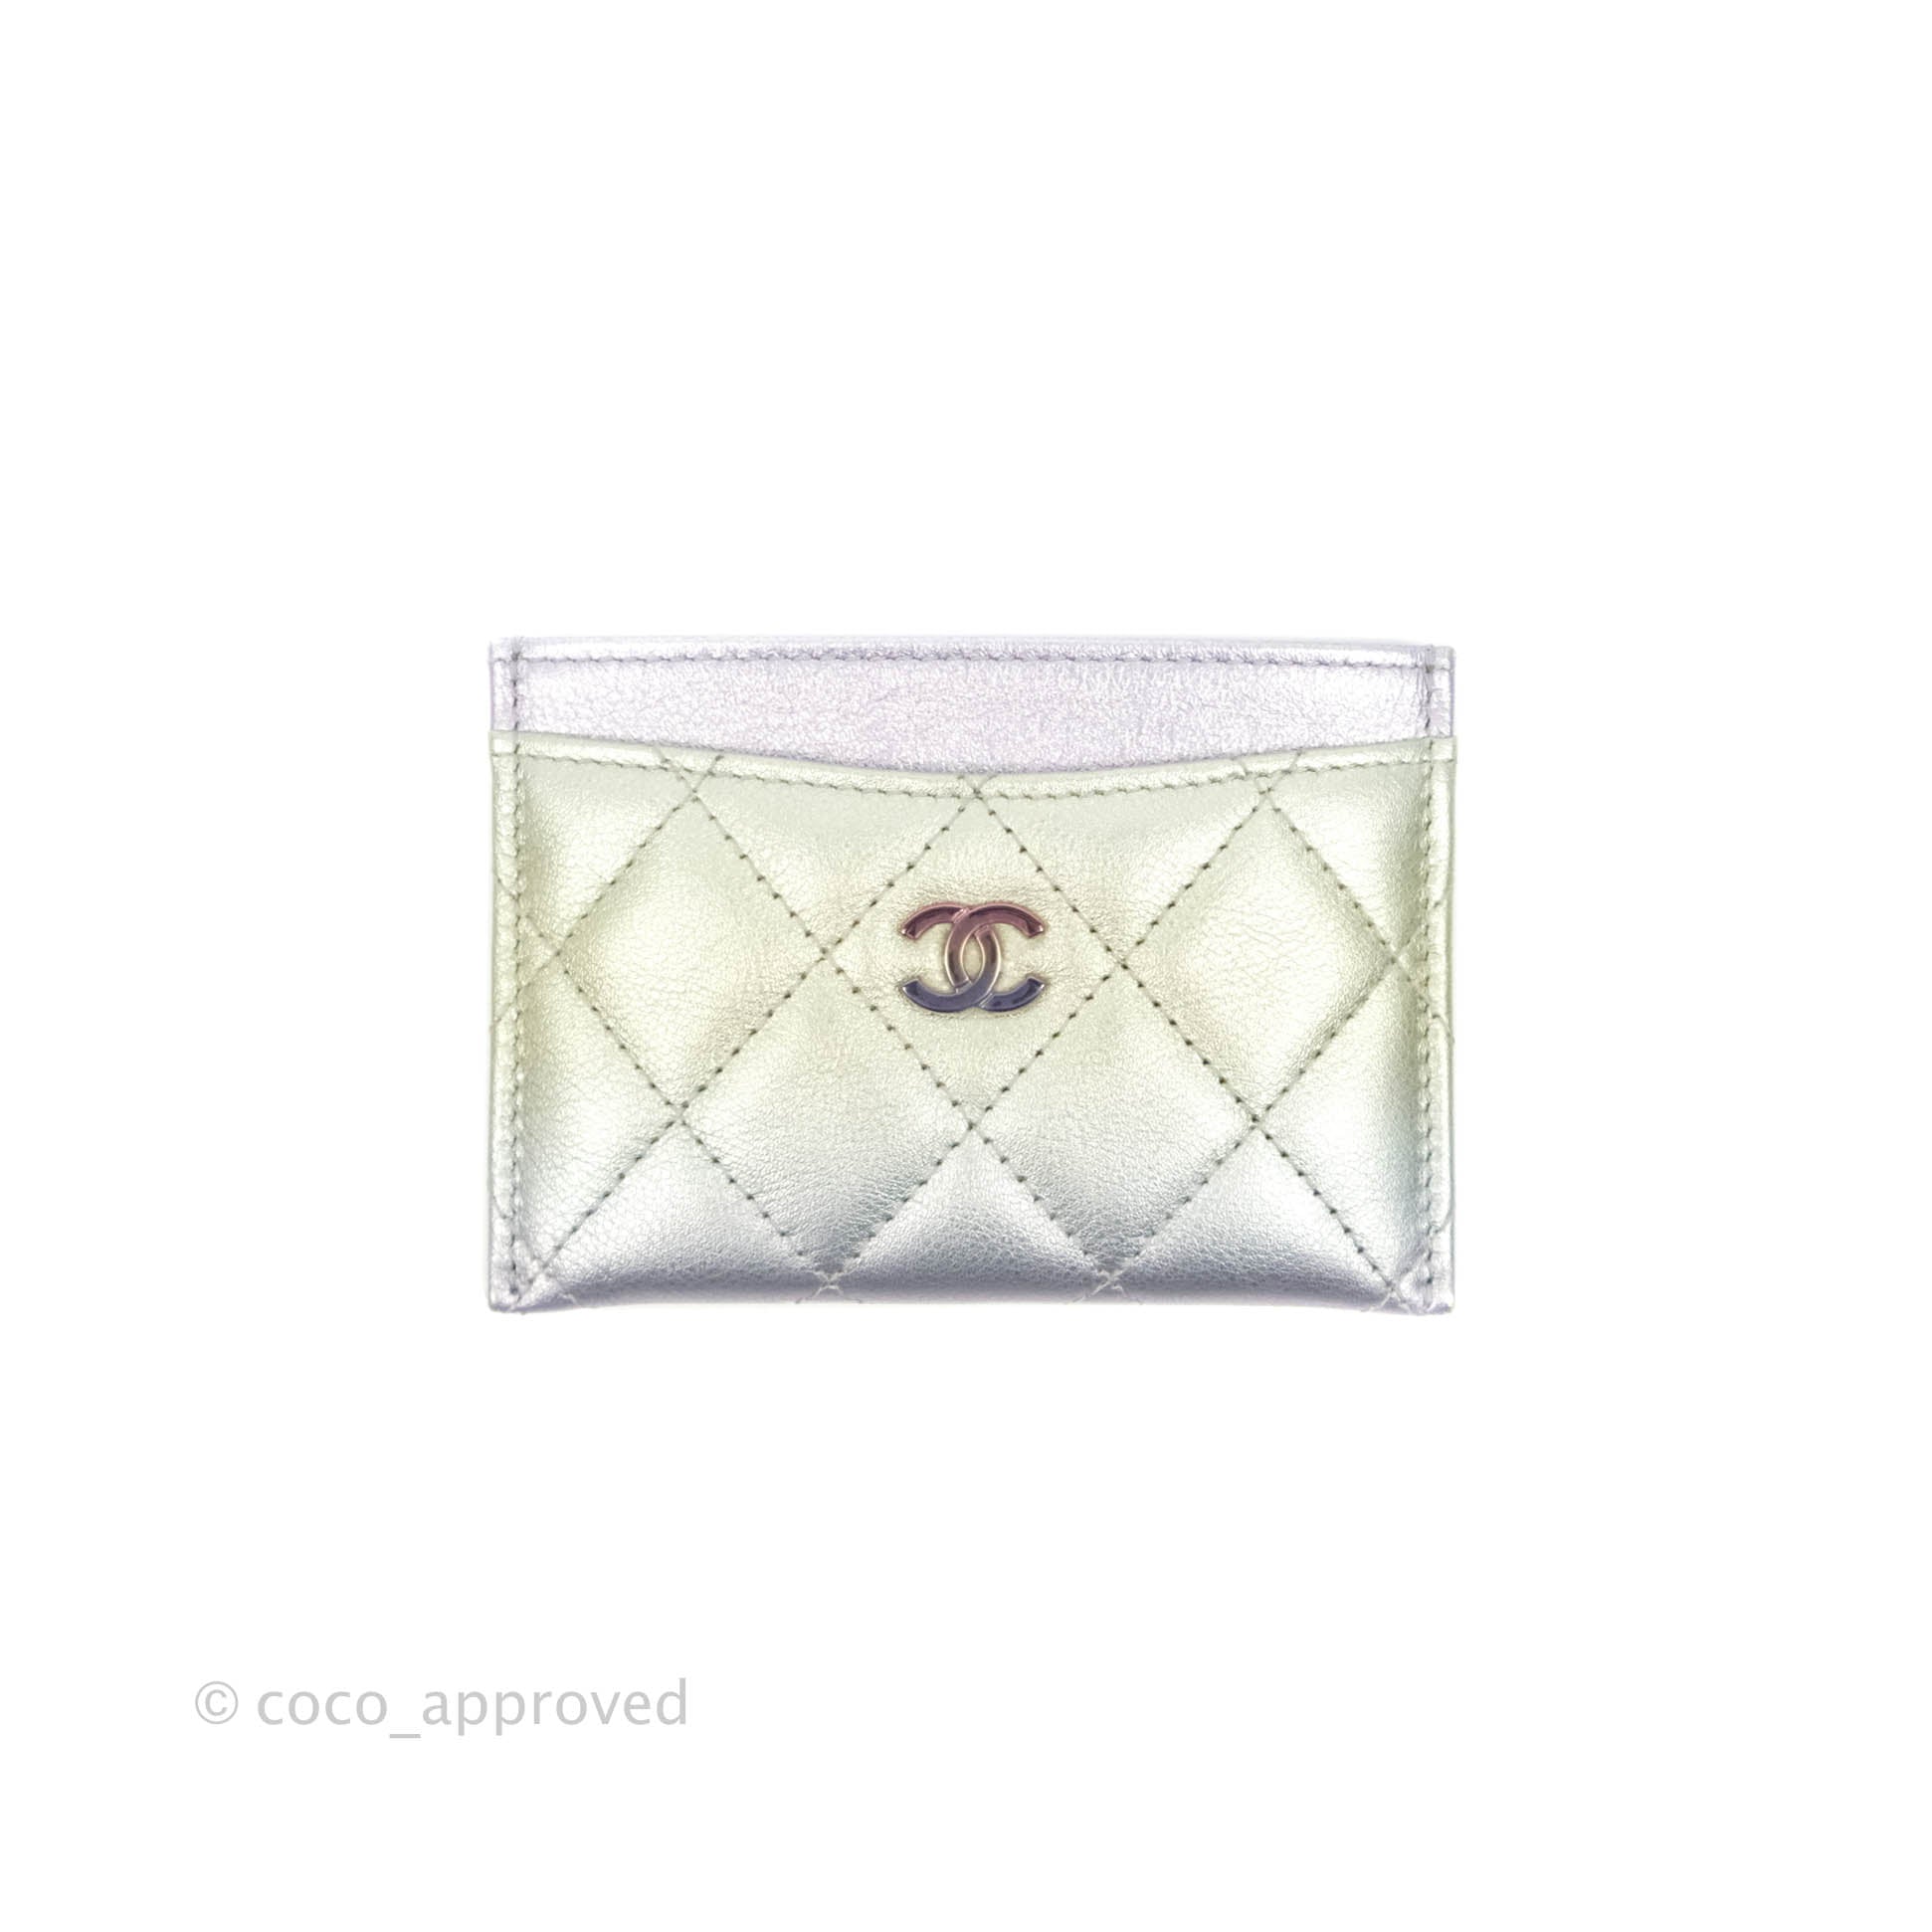 Chanel Classic Quilted Metallic Rainbow Lambskin Card Holder